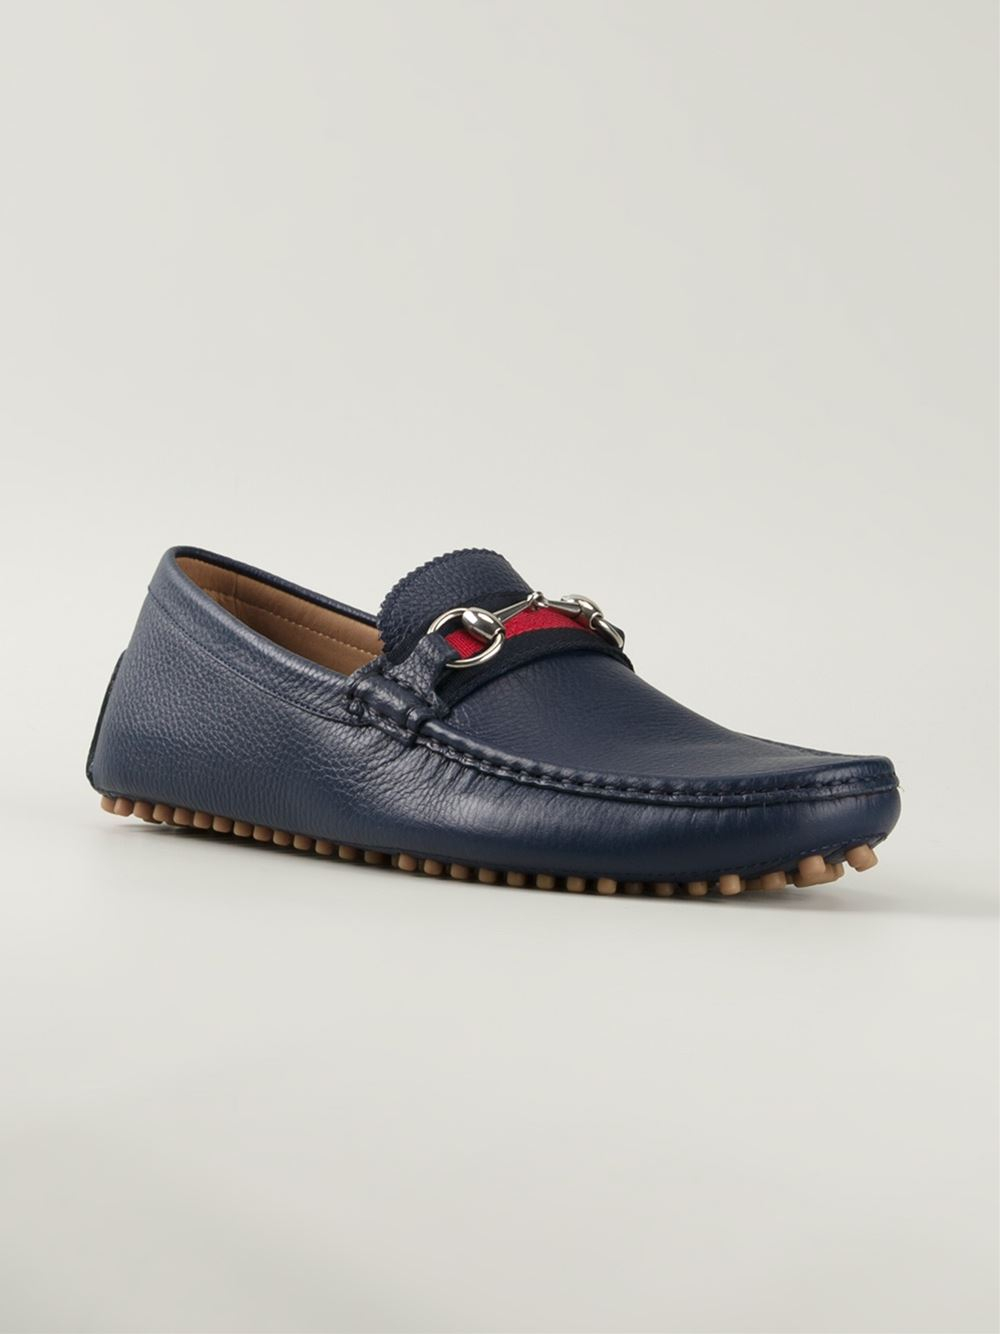 Gucci Driving Shoes in Blue for Men - Lyst